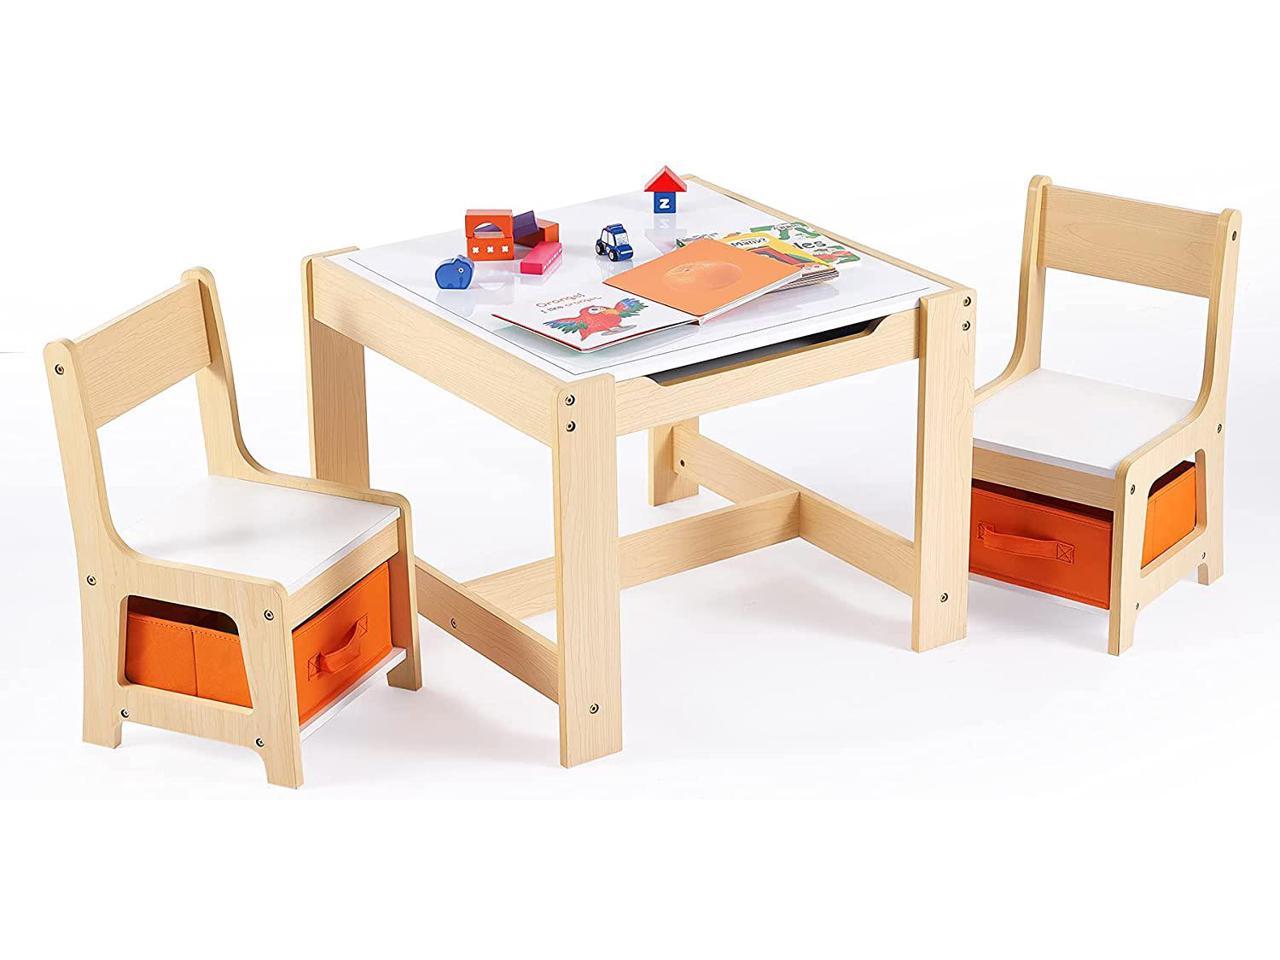 Double Sided Tabletop & Drawers For Toddlers & Small Children For Arts & Crafts 3 in 1 Activity Table With 2 Chairs CO-Z Multipurpose Kids Table & Chair Set With Toy Storage Playing & More 